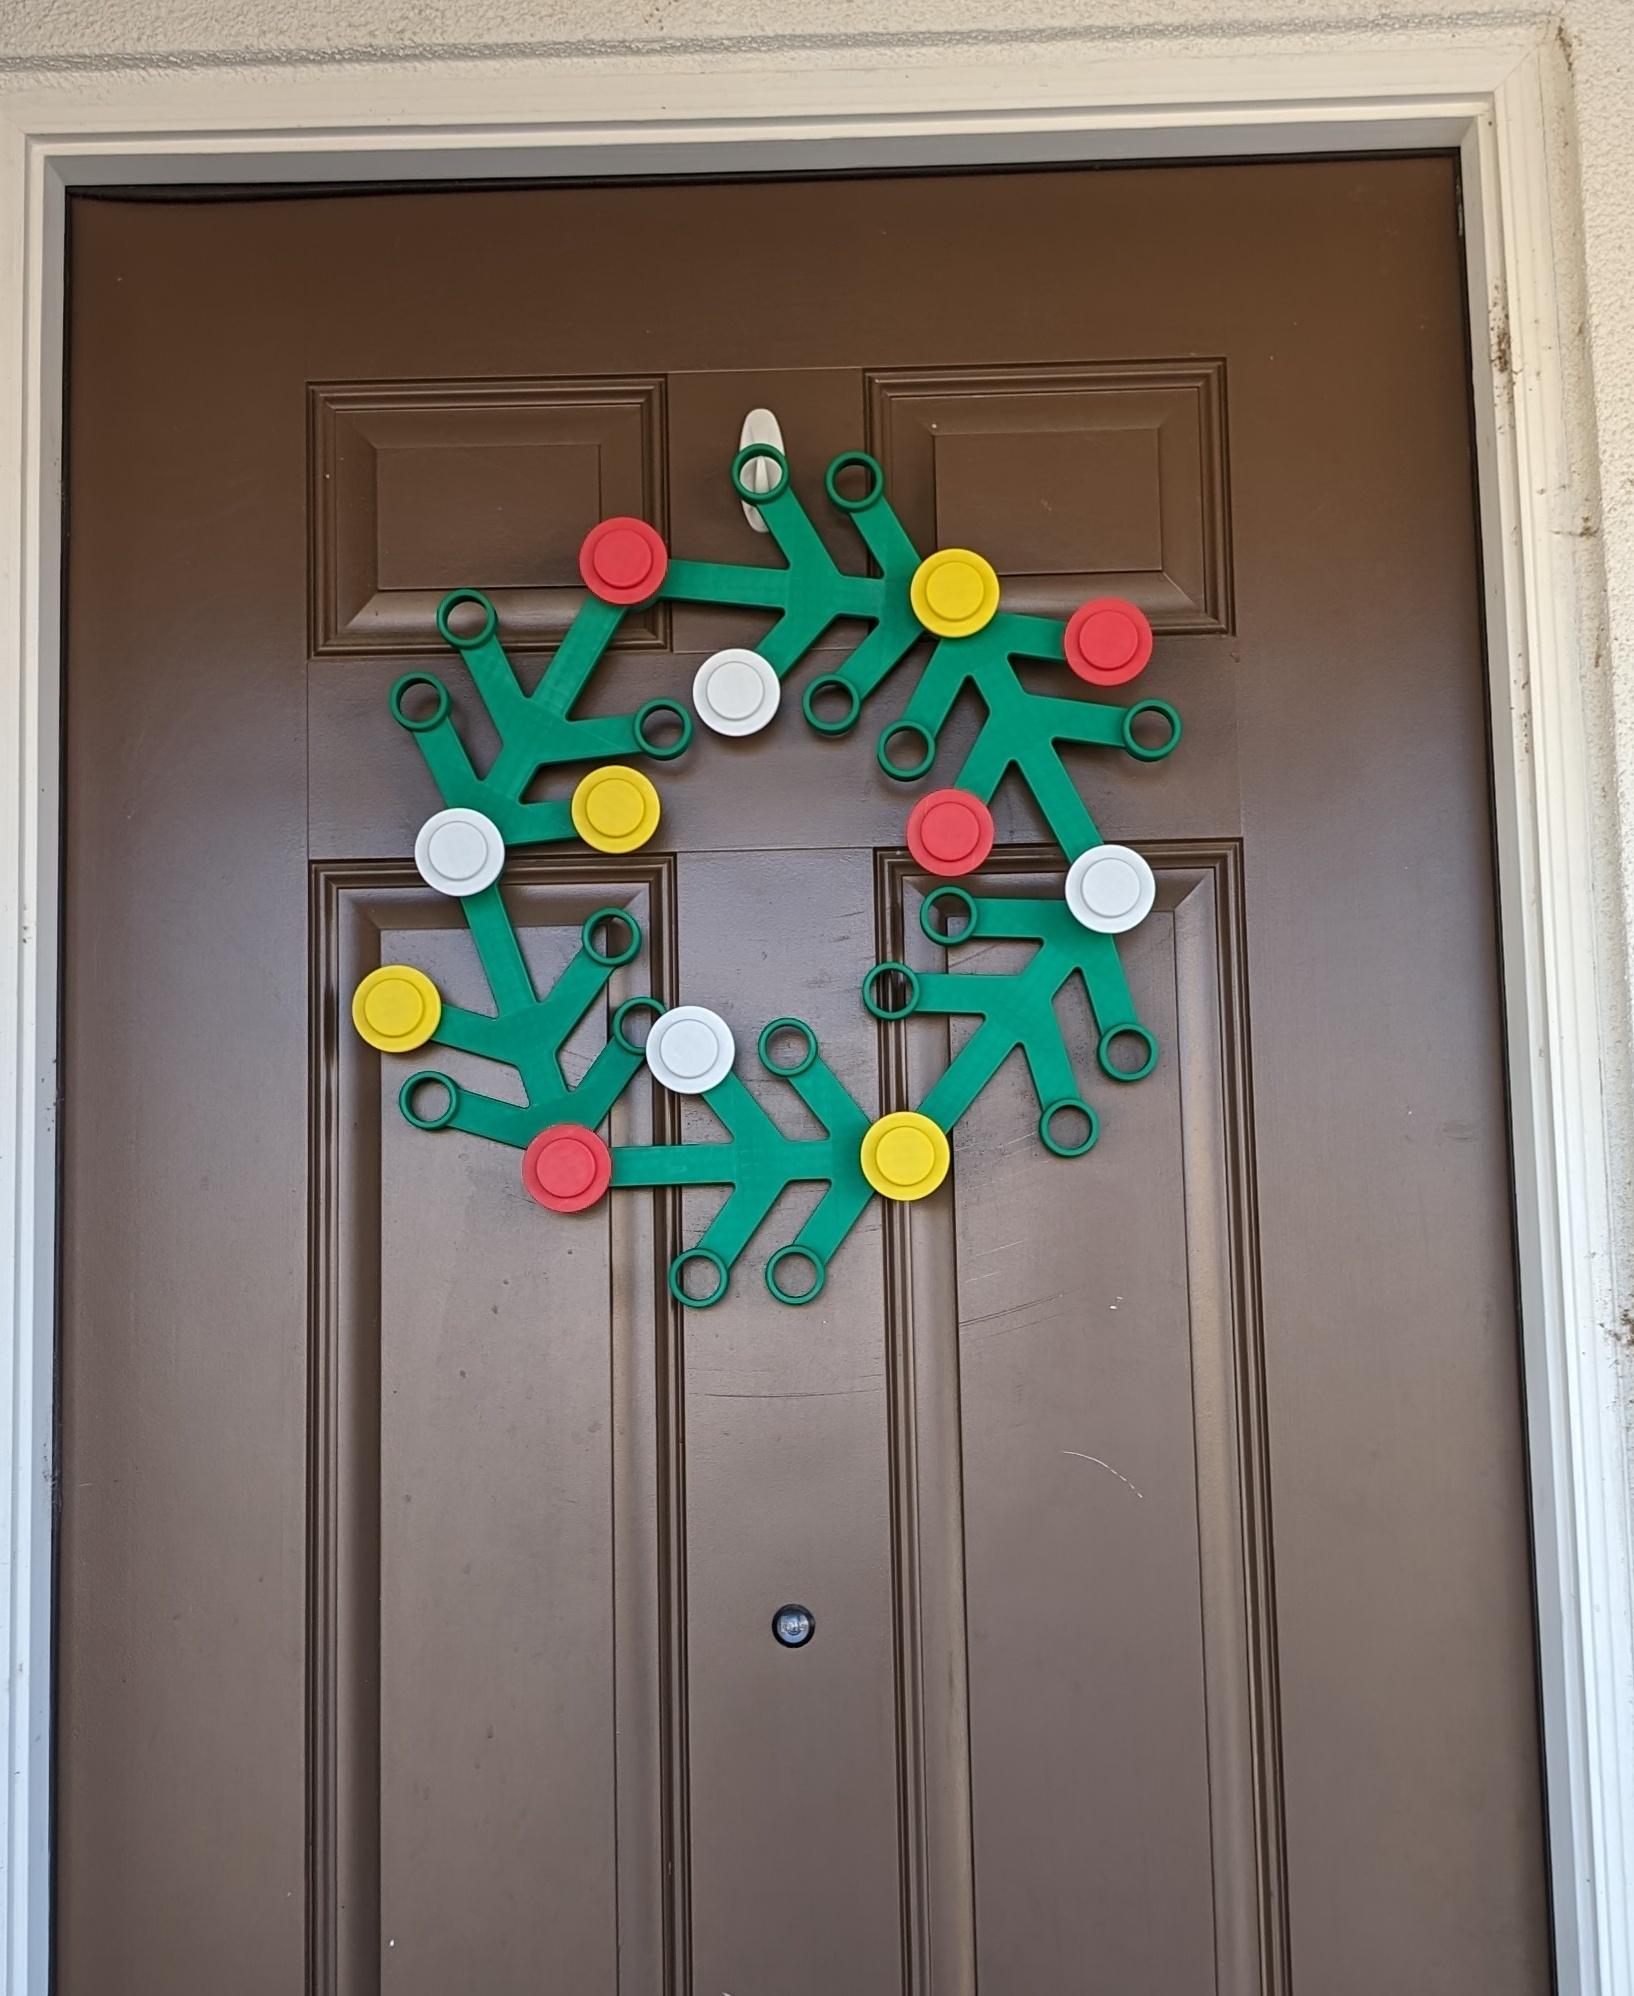 BIG LEt'GO Holiday Wreath! - 200% NO SUPPORTS! - Printed as soon as I saw it on socials.  Great design!  - 3d model